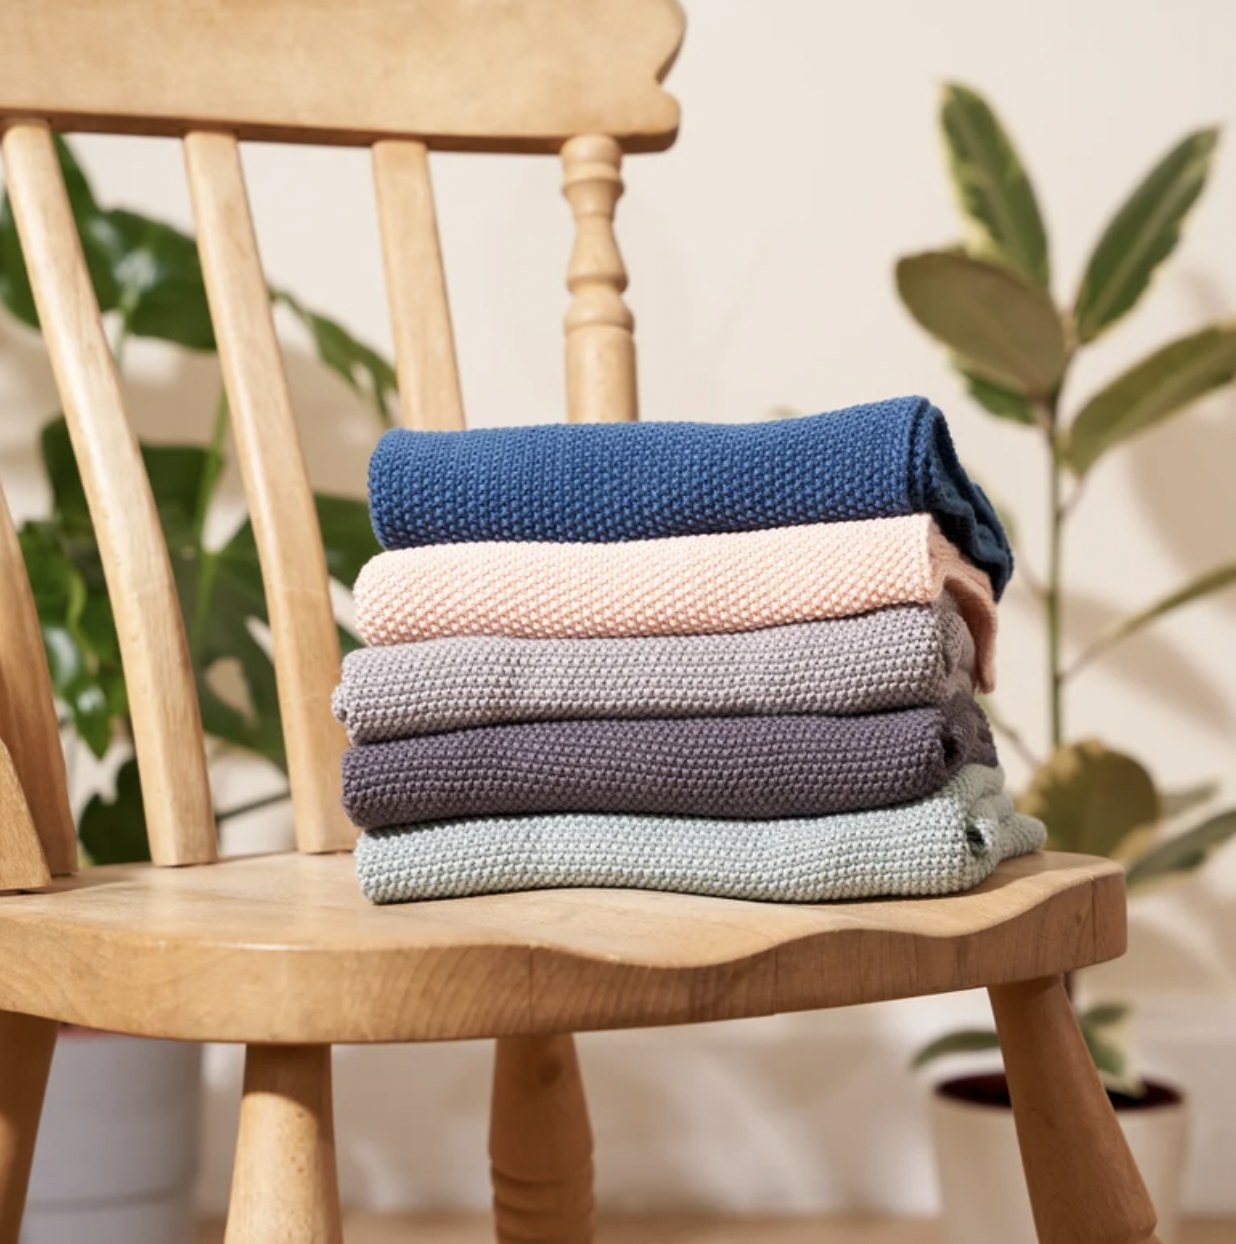 A stack of five cotton hand towels in different colors on a chair